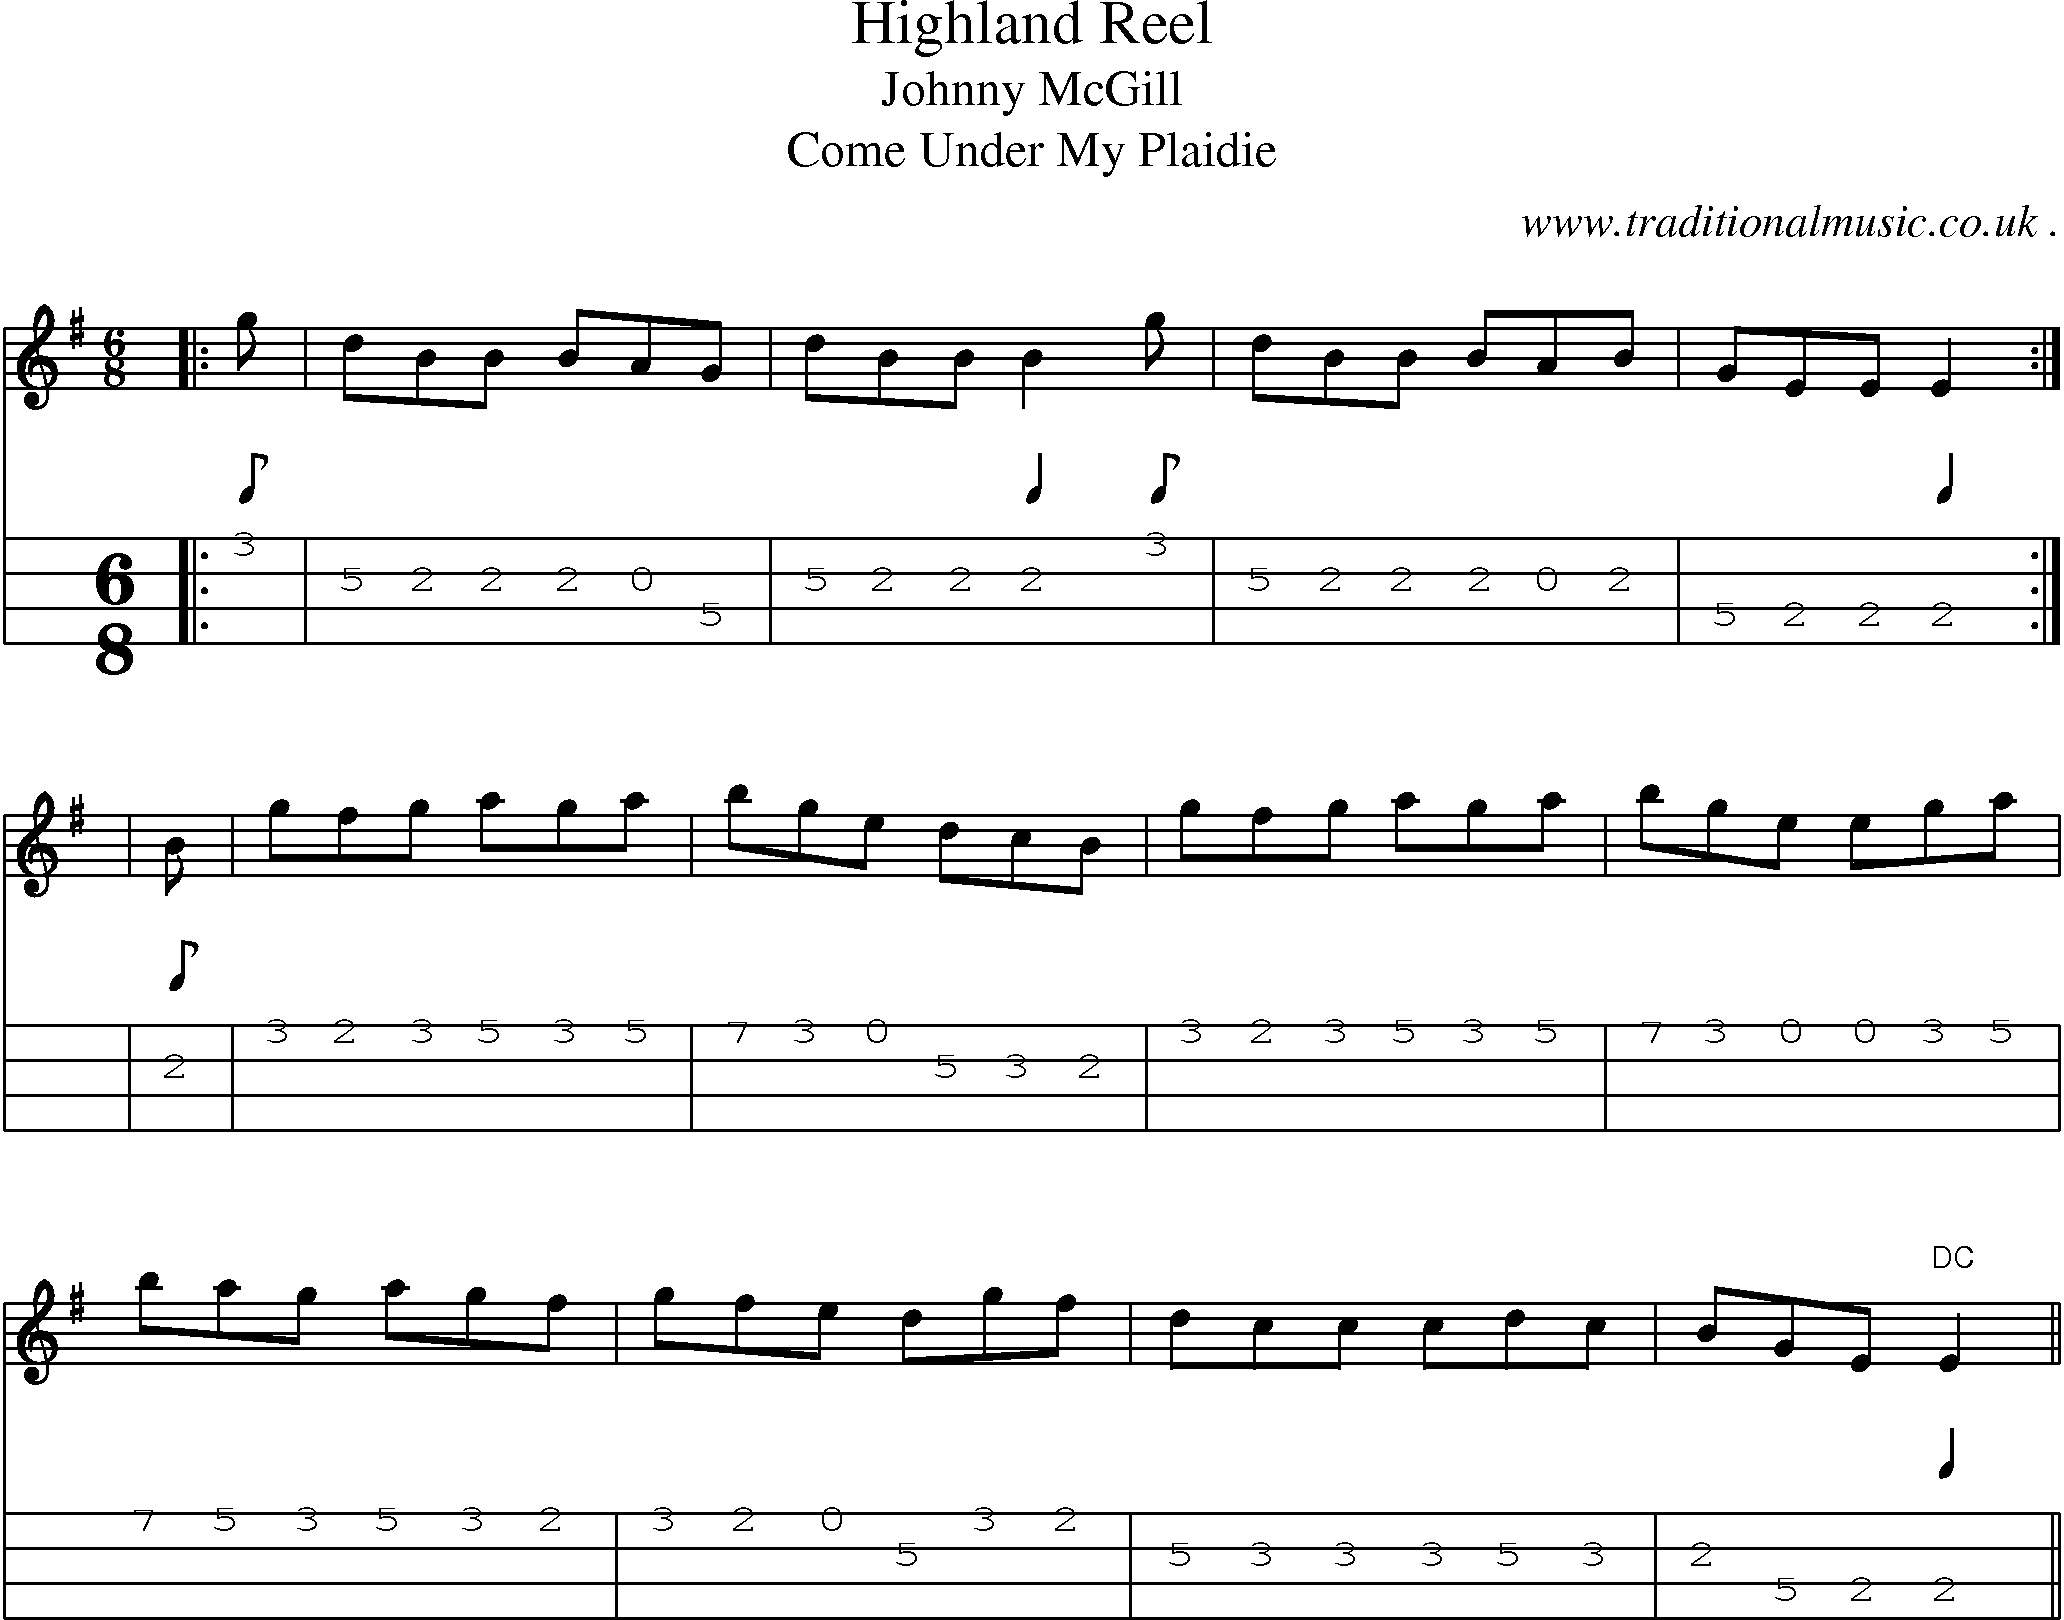 Sheet-Music and Mandolin Tabs for Highland Reel